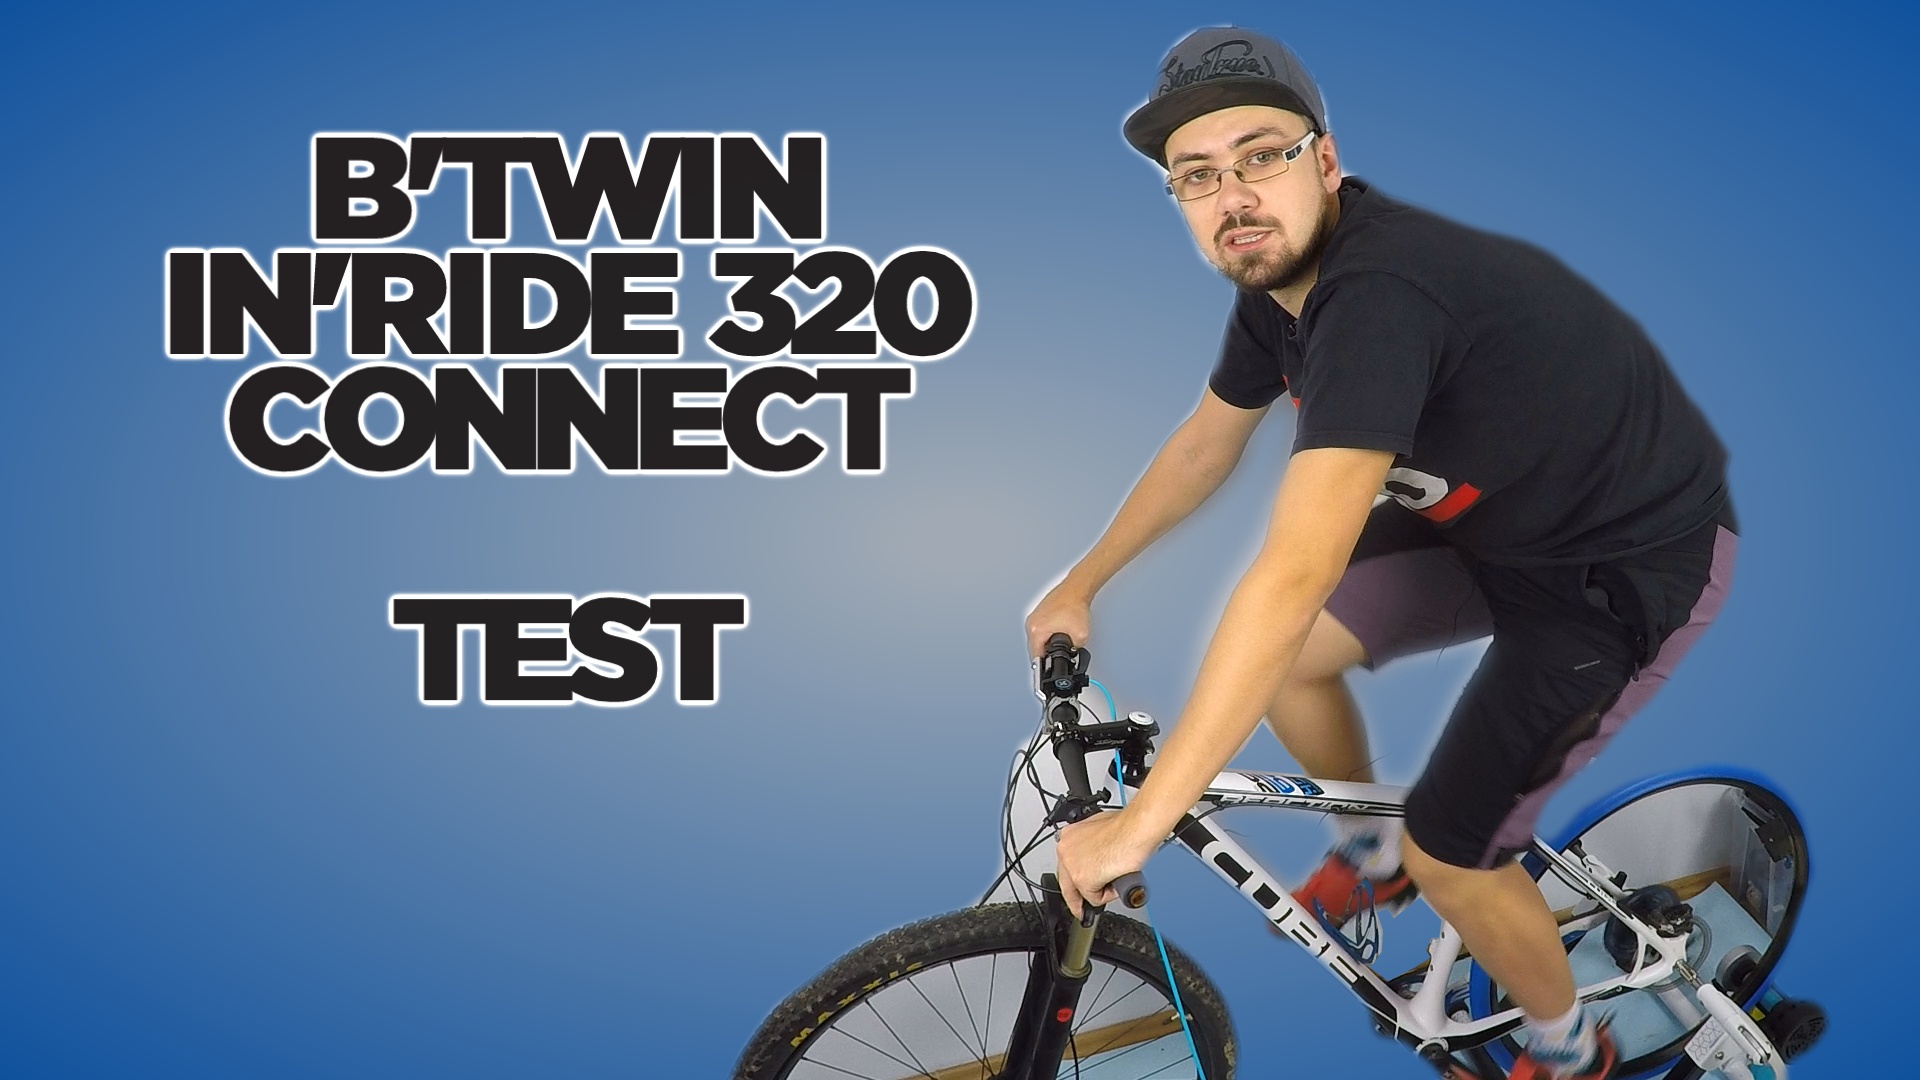 Trenażer rowerowy B’TWIN In’ride 320 connect